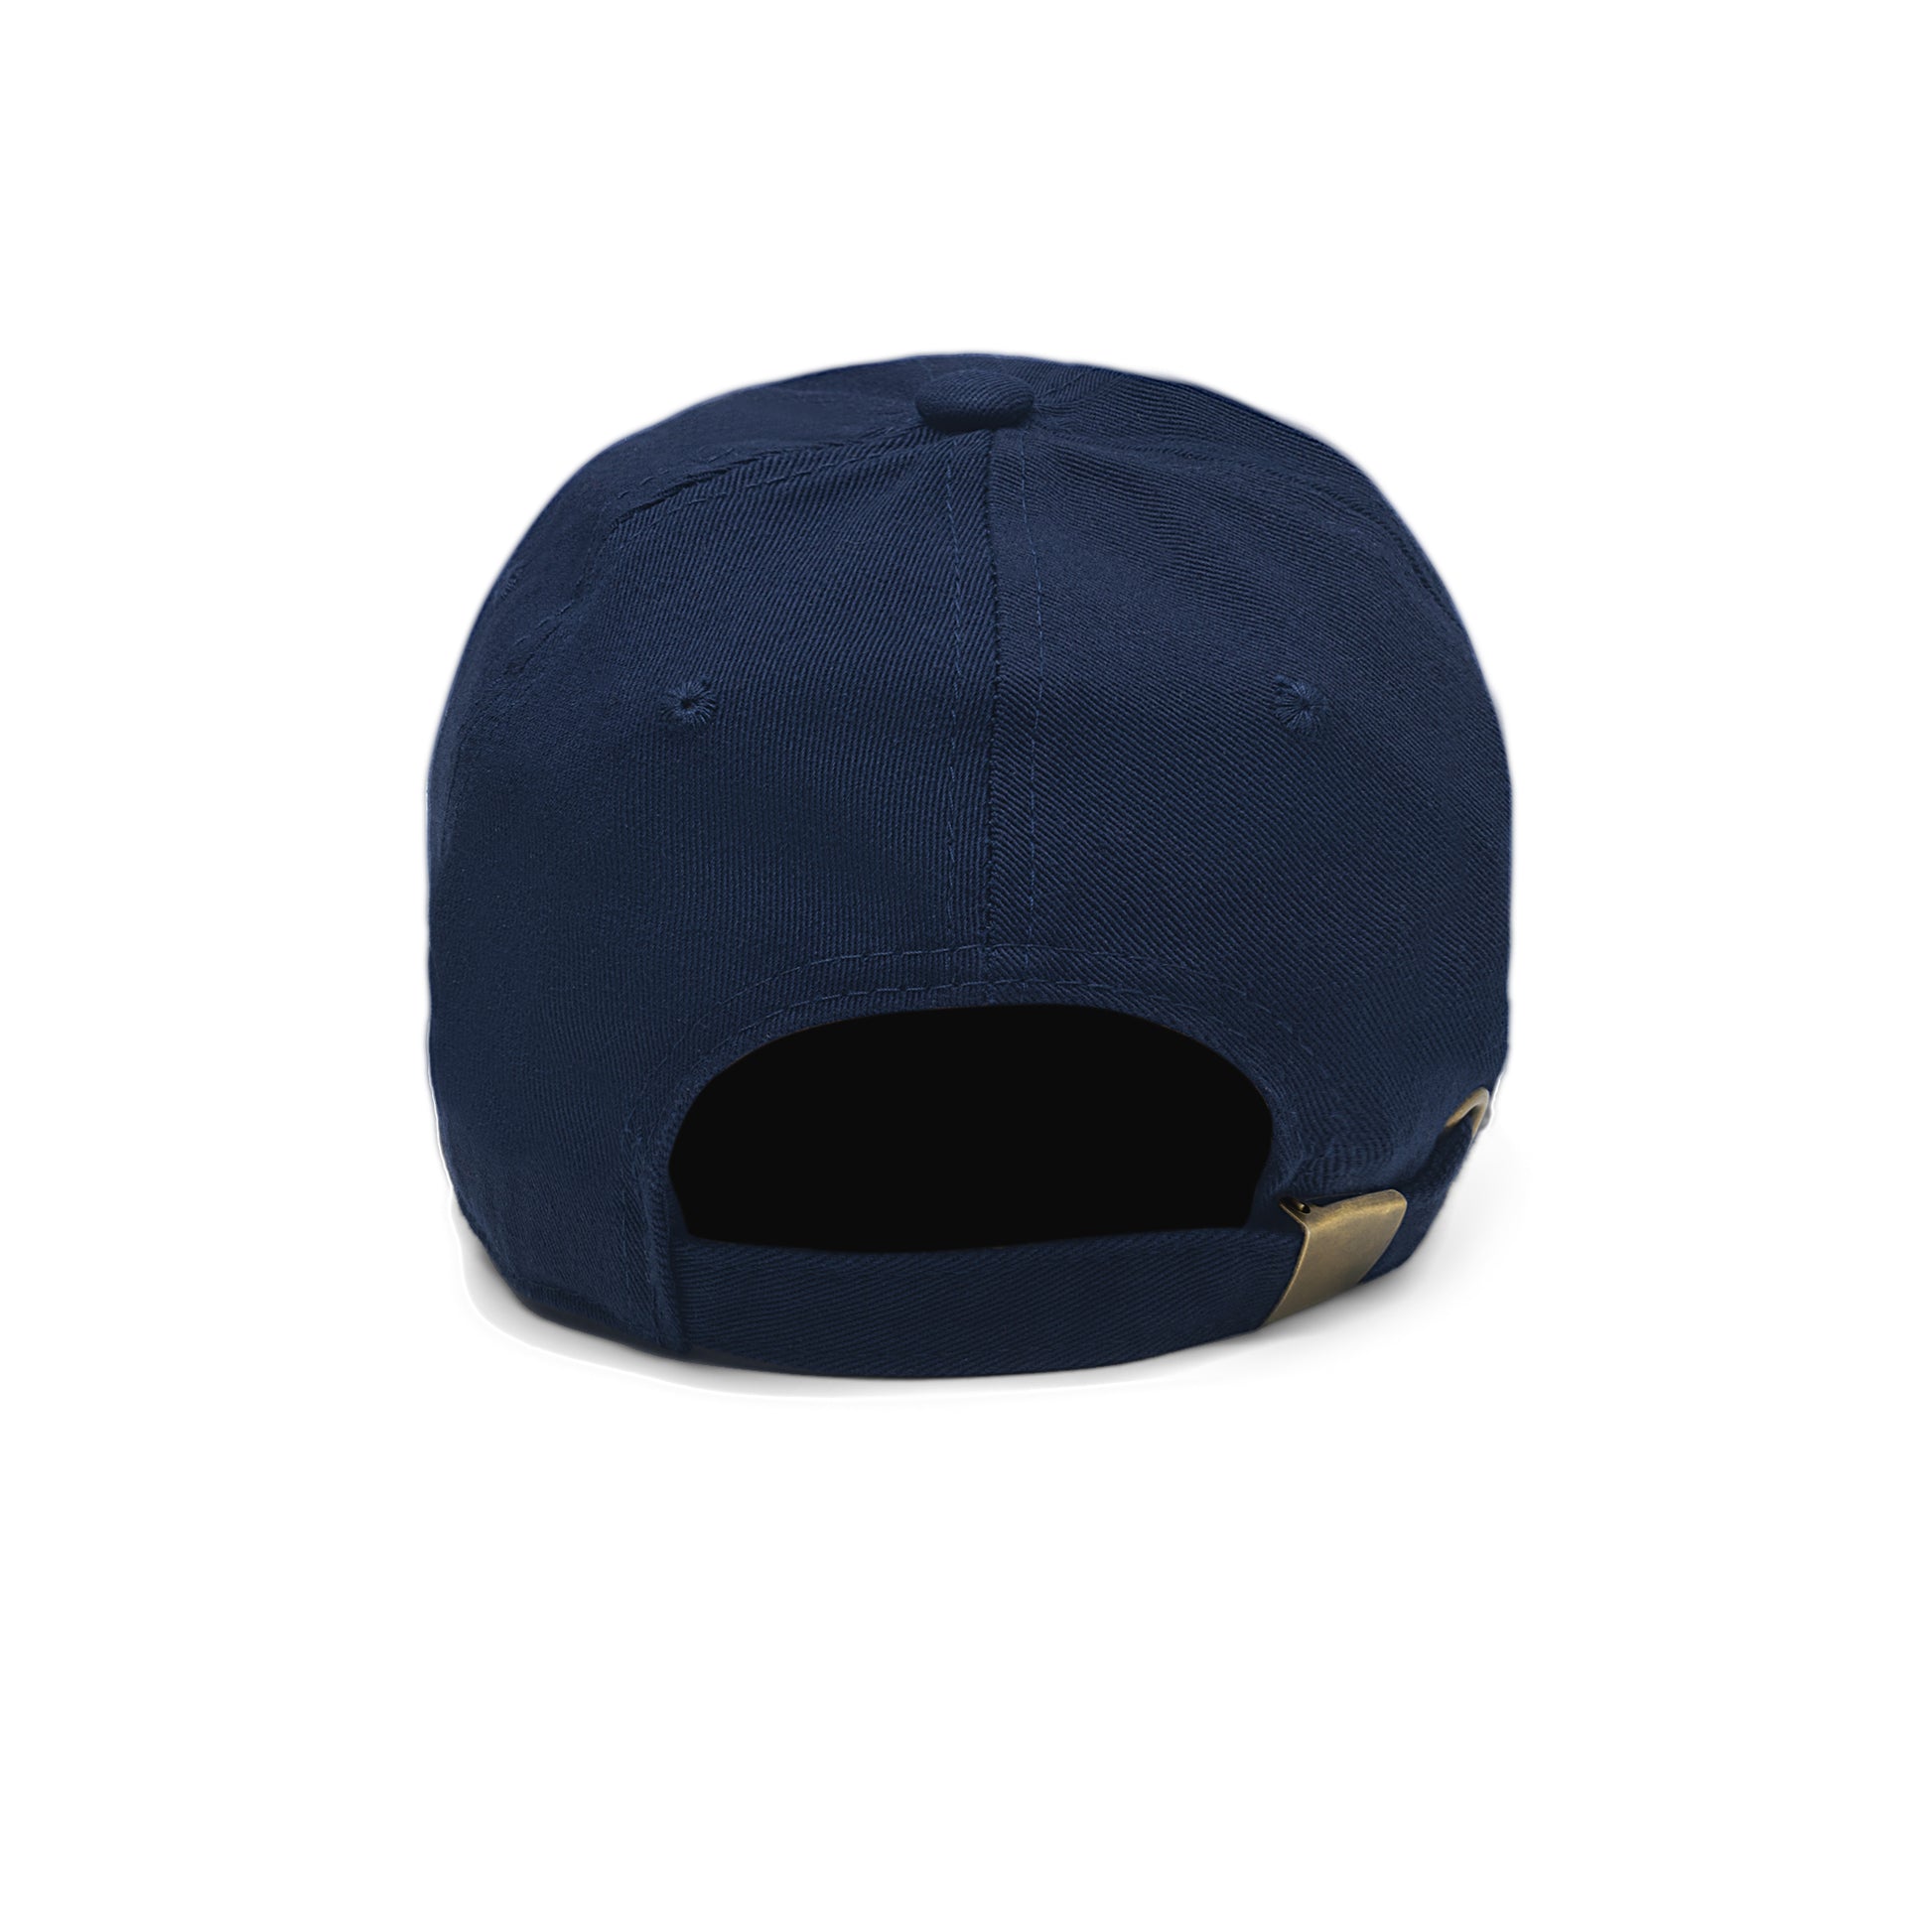 plain navy back of hat with adjustable metal buckle 